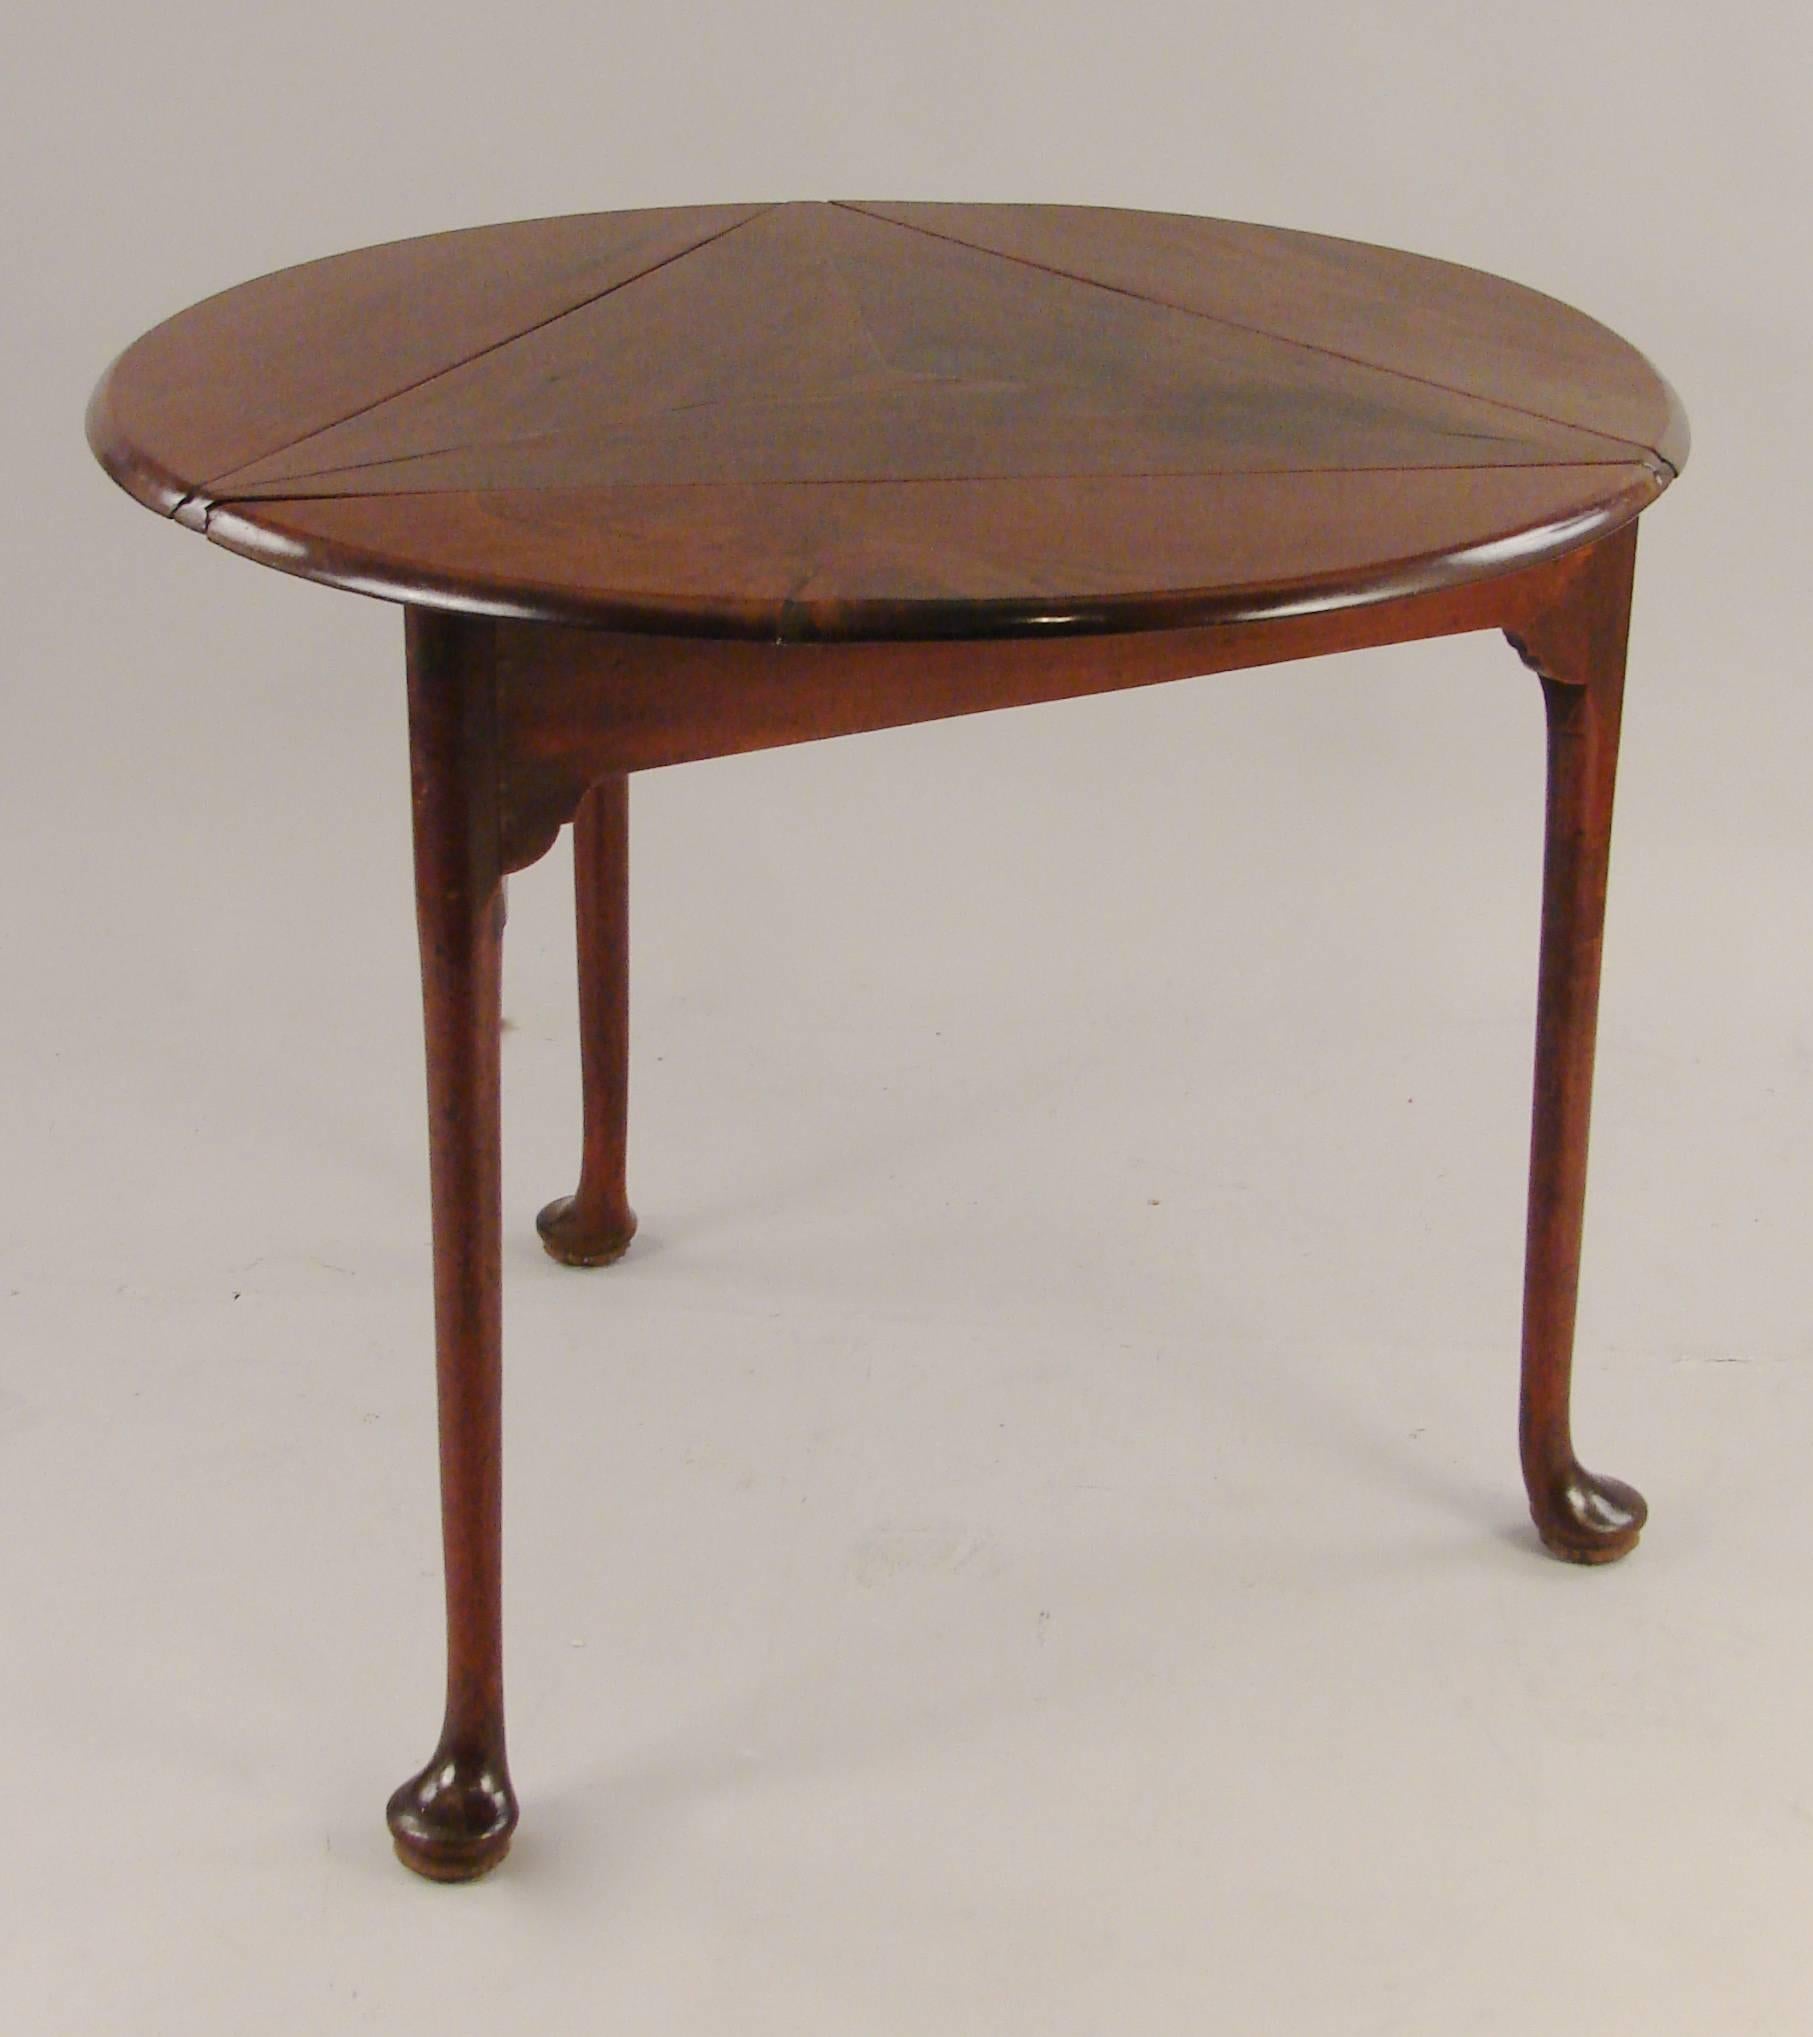 An unusual George II mahogany drop-leaf table, the triangular top revolves to form a round table, supported on cabriole legs ending in pad feet, circa 1760.